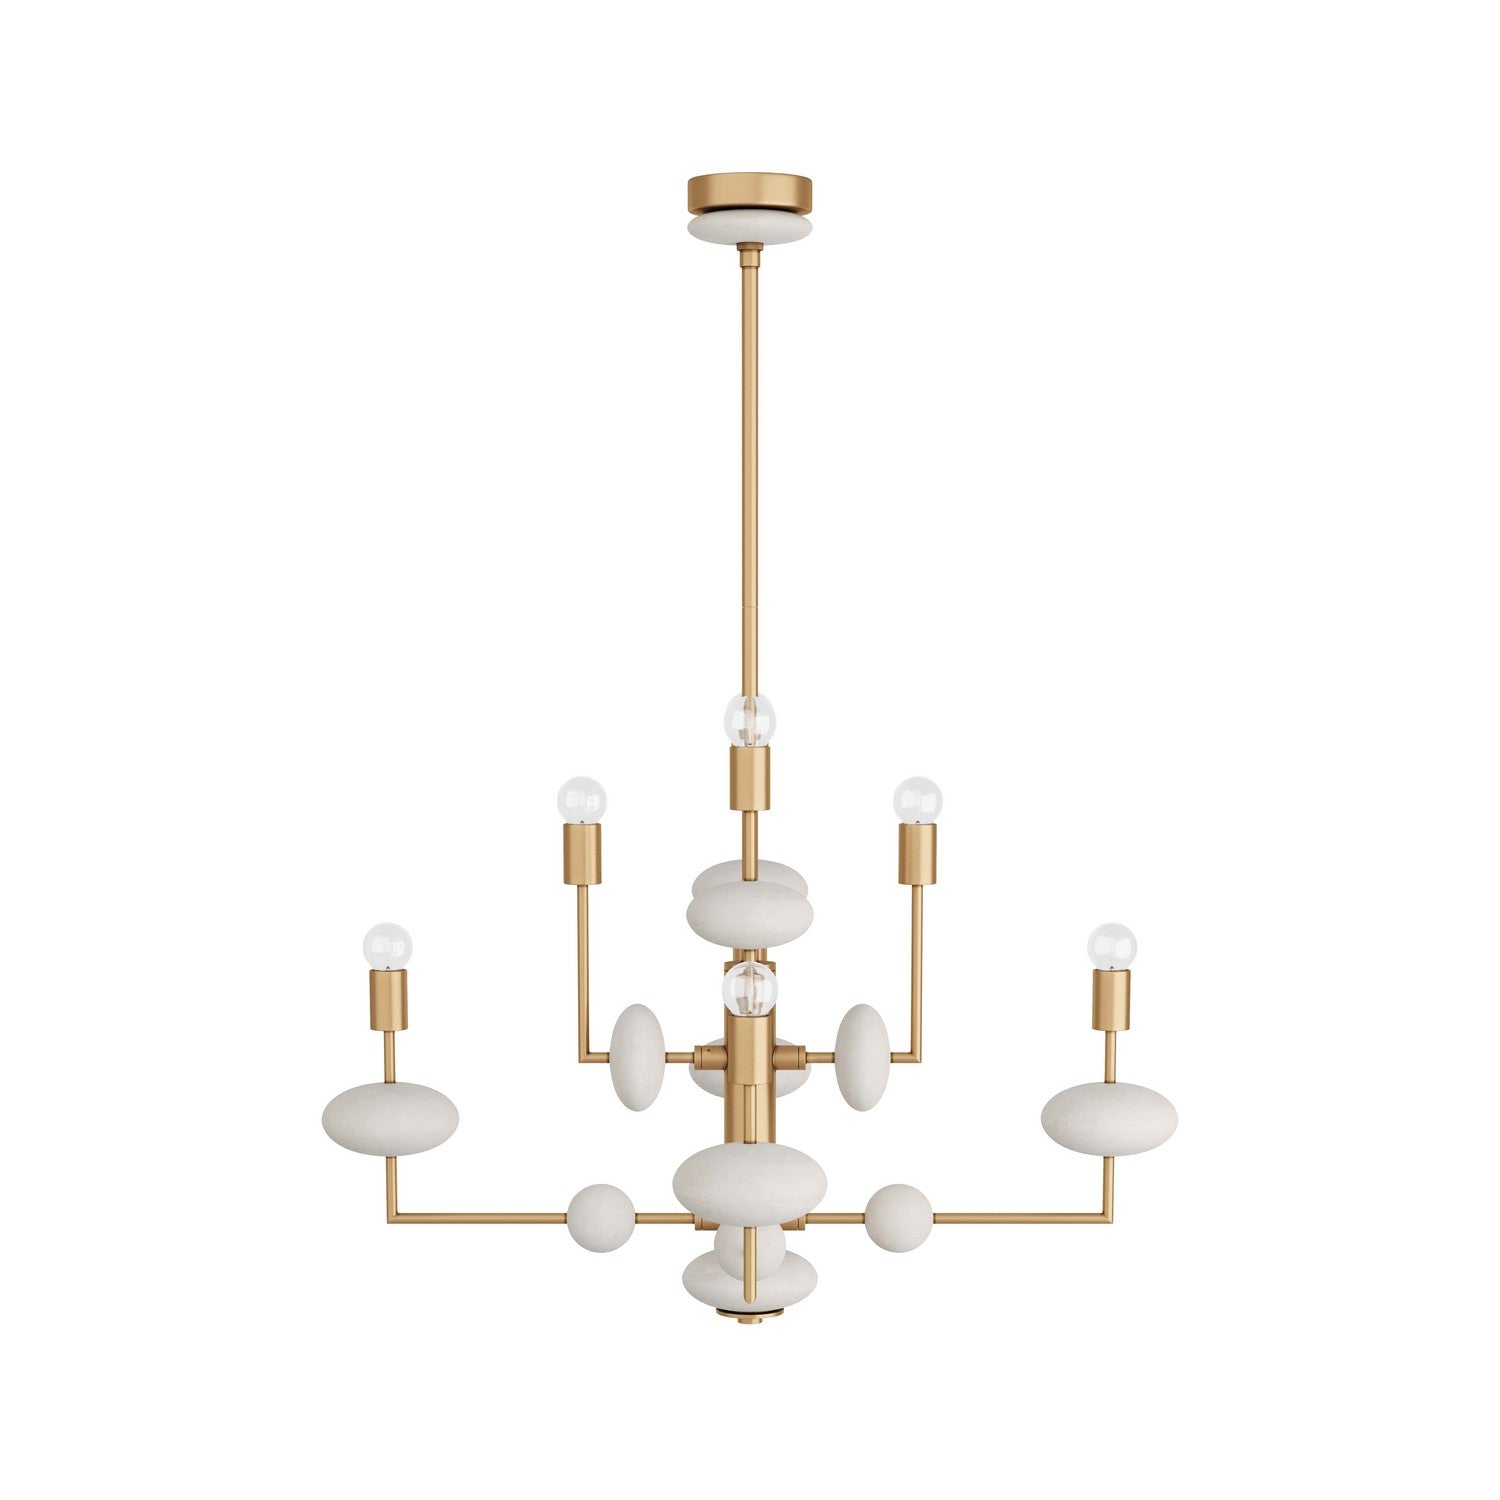 Eight Light Chandelier from the Vista collection in Antique Brass finish